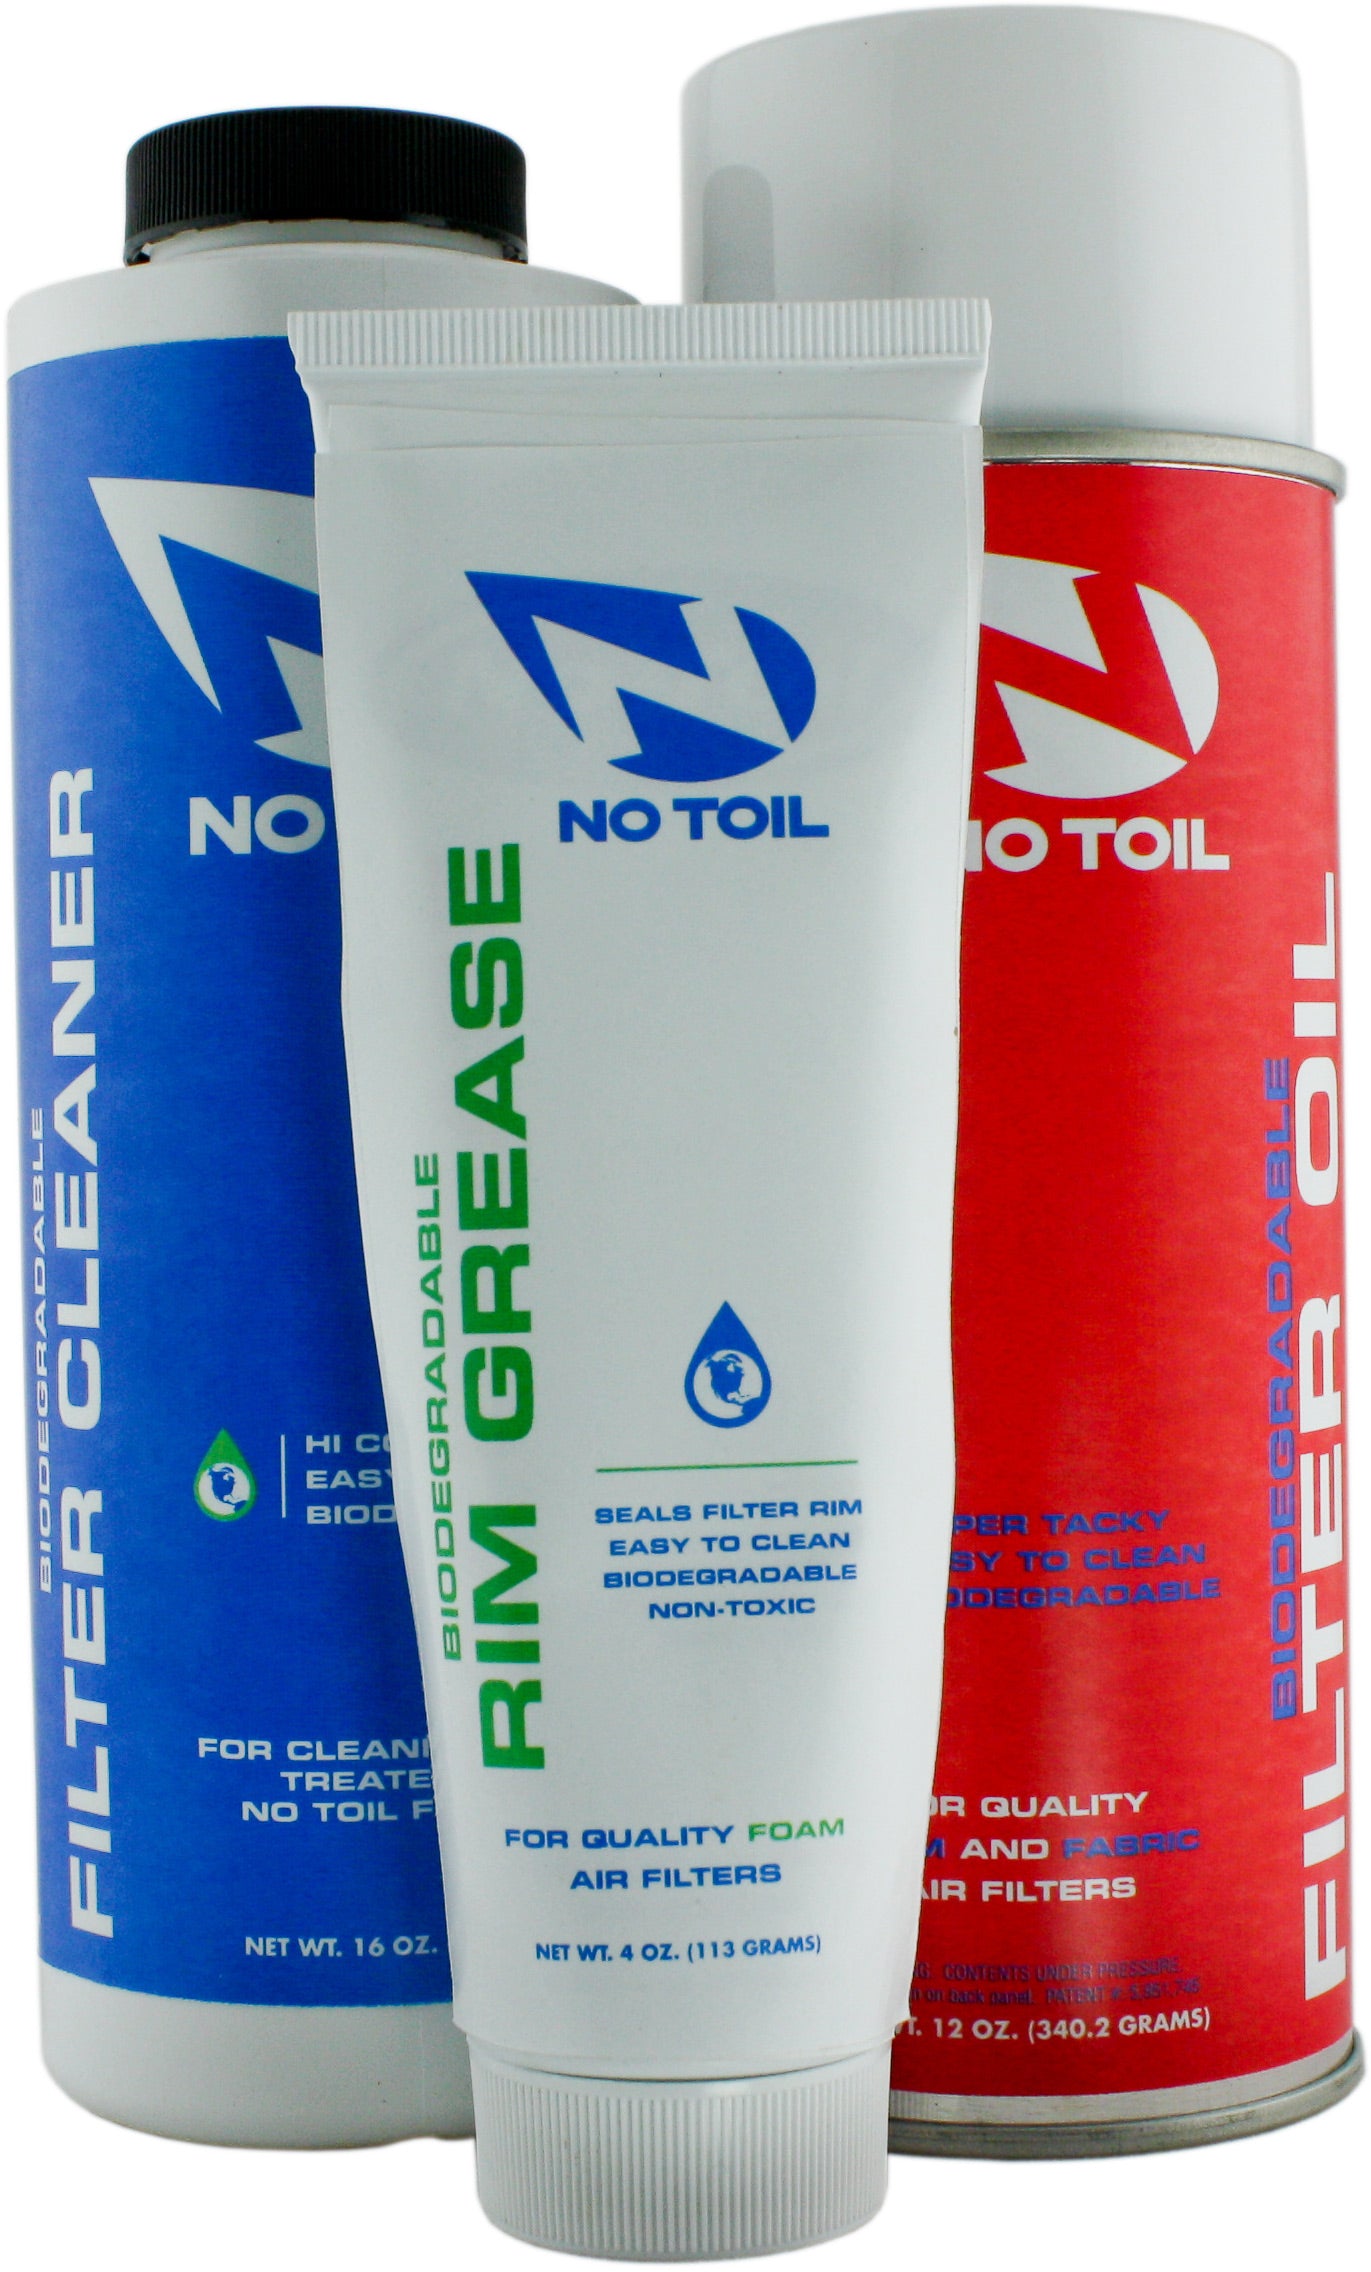 NO-TOIL AEROSOL 3 PACK containing air filter oil spray cans on white background